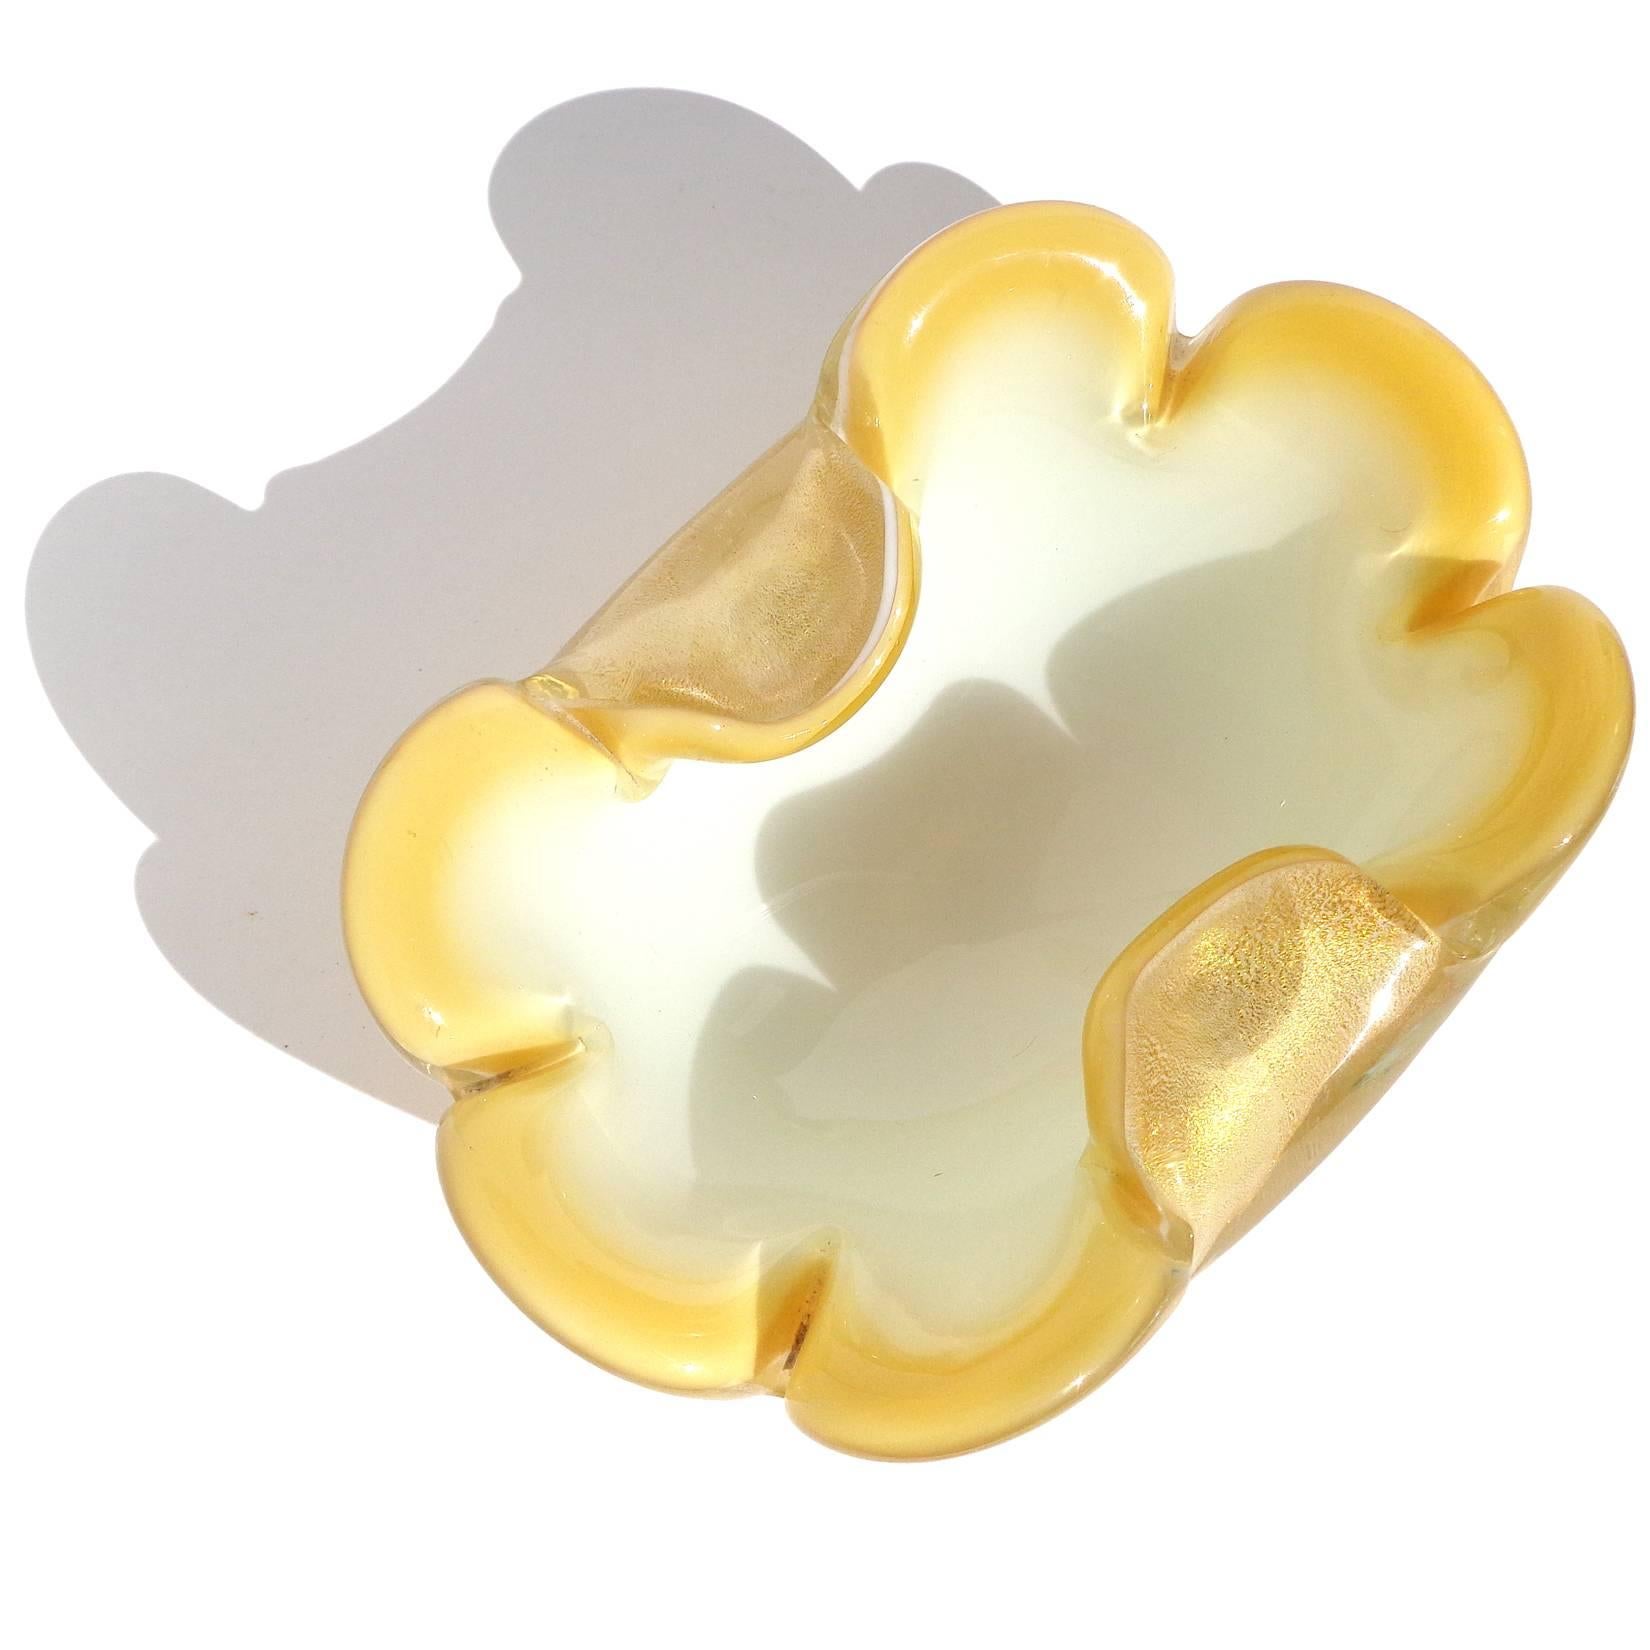 Beautiful Murano hand blown bright yellow rim, white and gold flecks Italian art glass bowl. Documented to designer Archimede Seguso. The piece is profusely covered in gold leaf, with petals as the rim. Perfect candy or jewelry dish. Also available